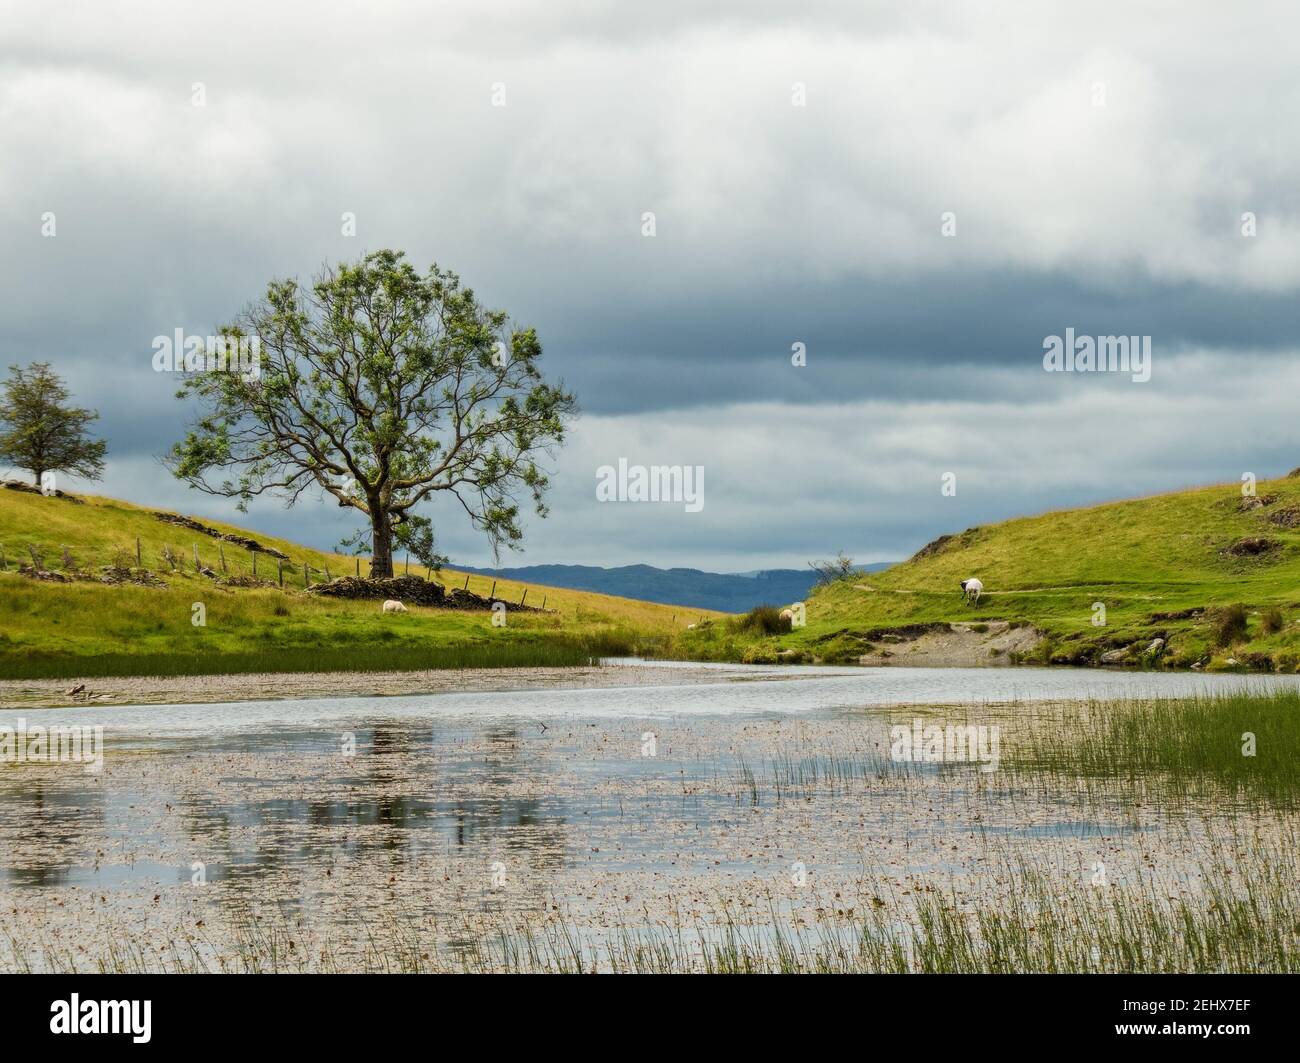 A tree on the shore of School Knot Tarn: a small body of water in the English Lake District Stock Photo